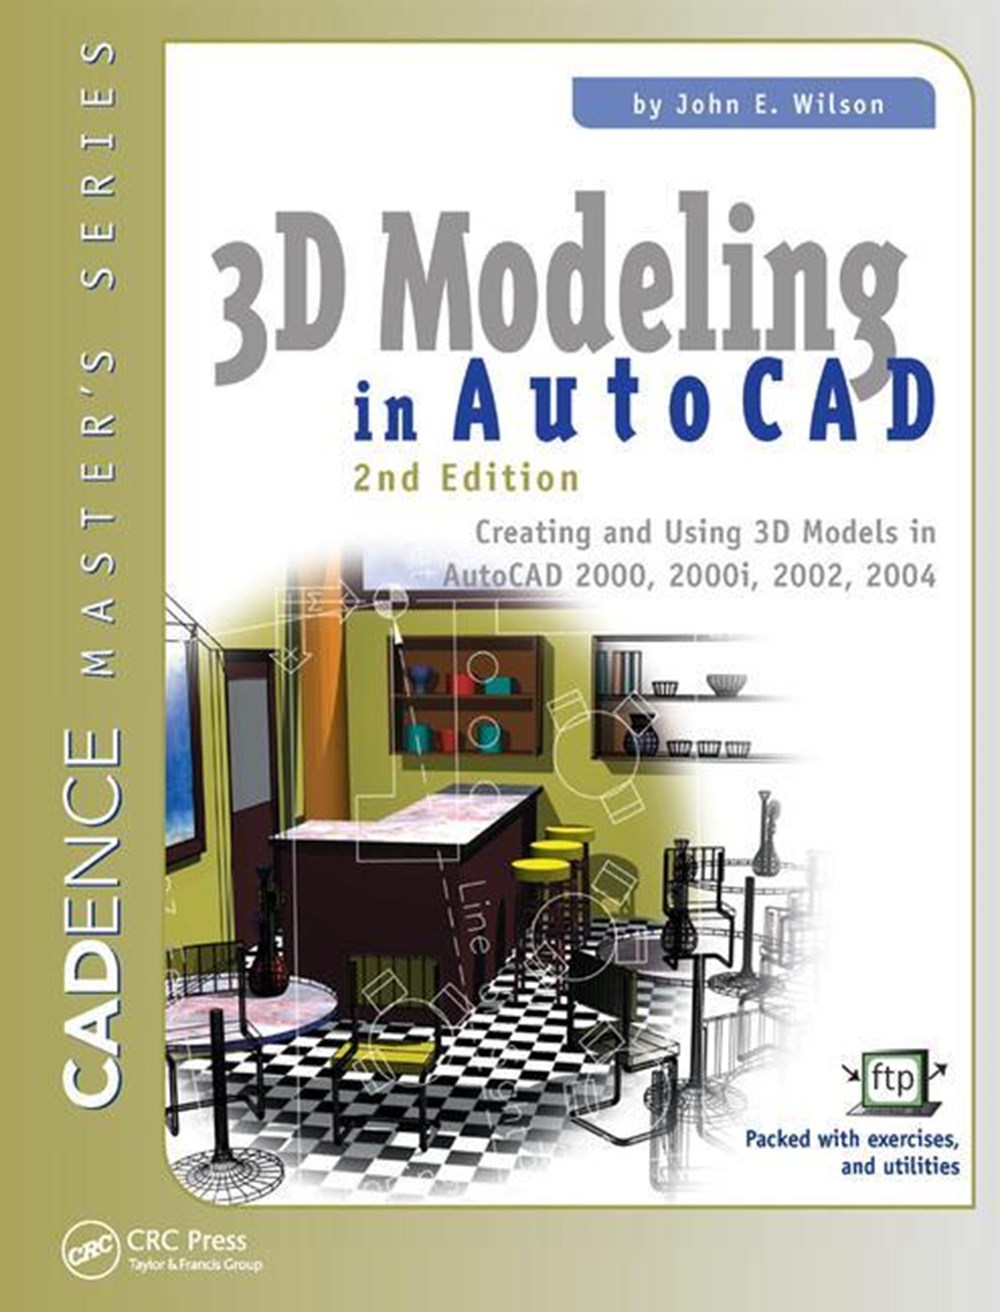 3D Modeling in AutoCAD Creating and Using 3D Models in AutoCAD 2000, 2000i, 2002, and 2004